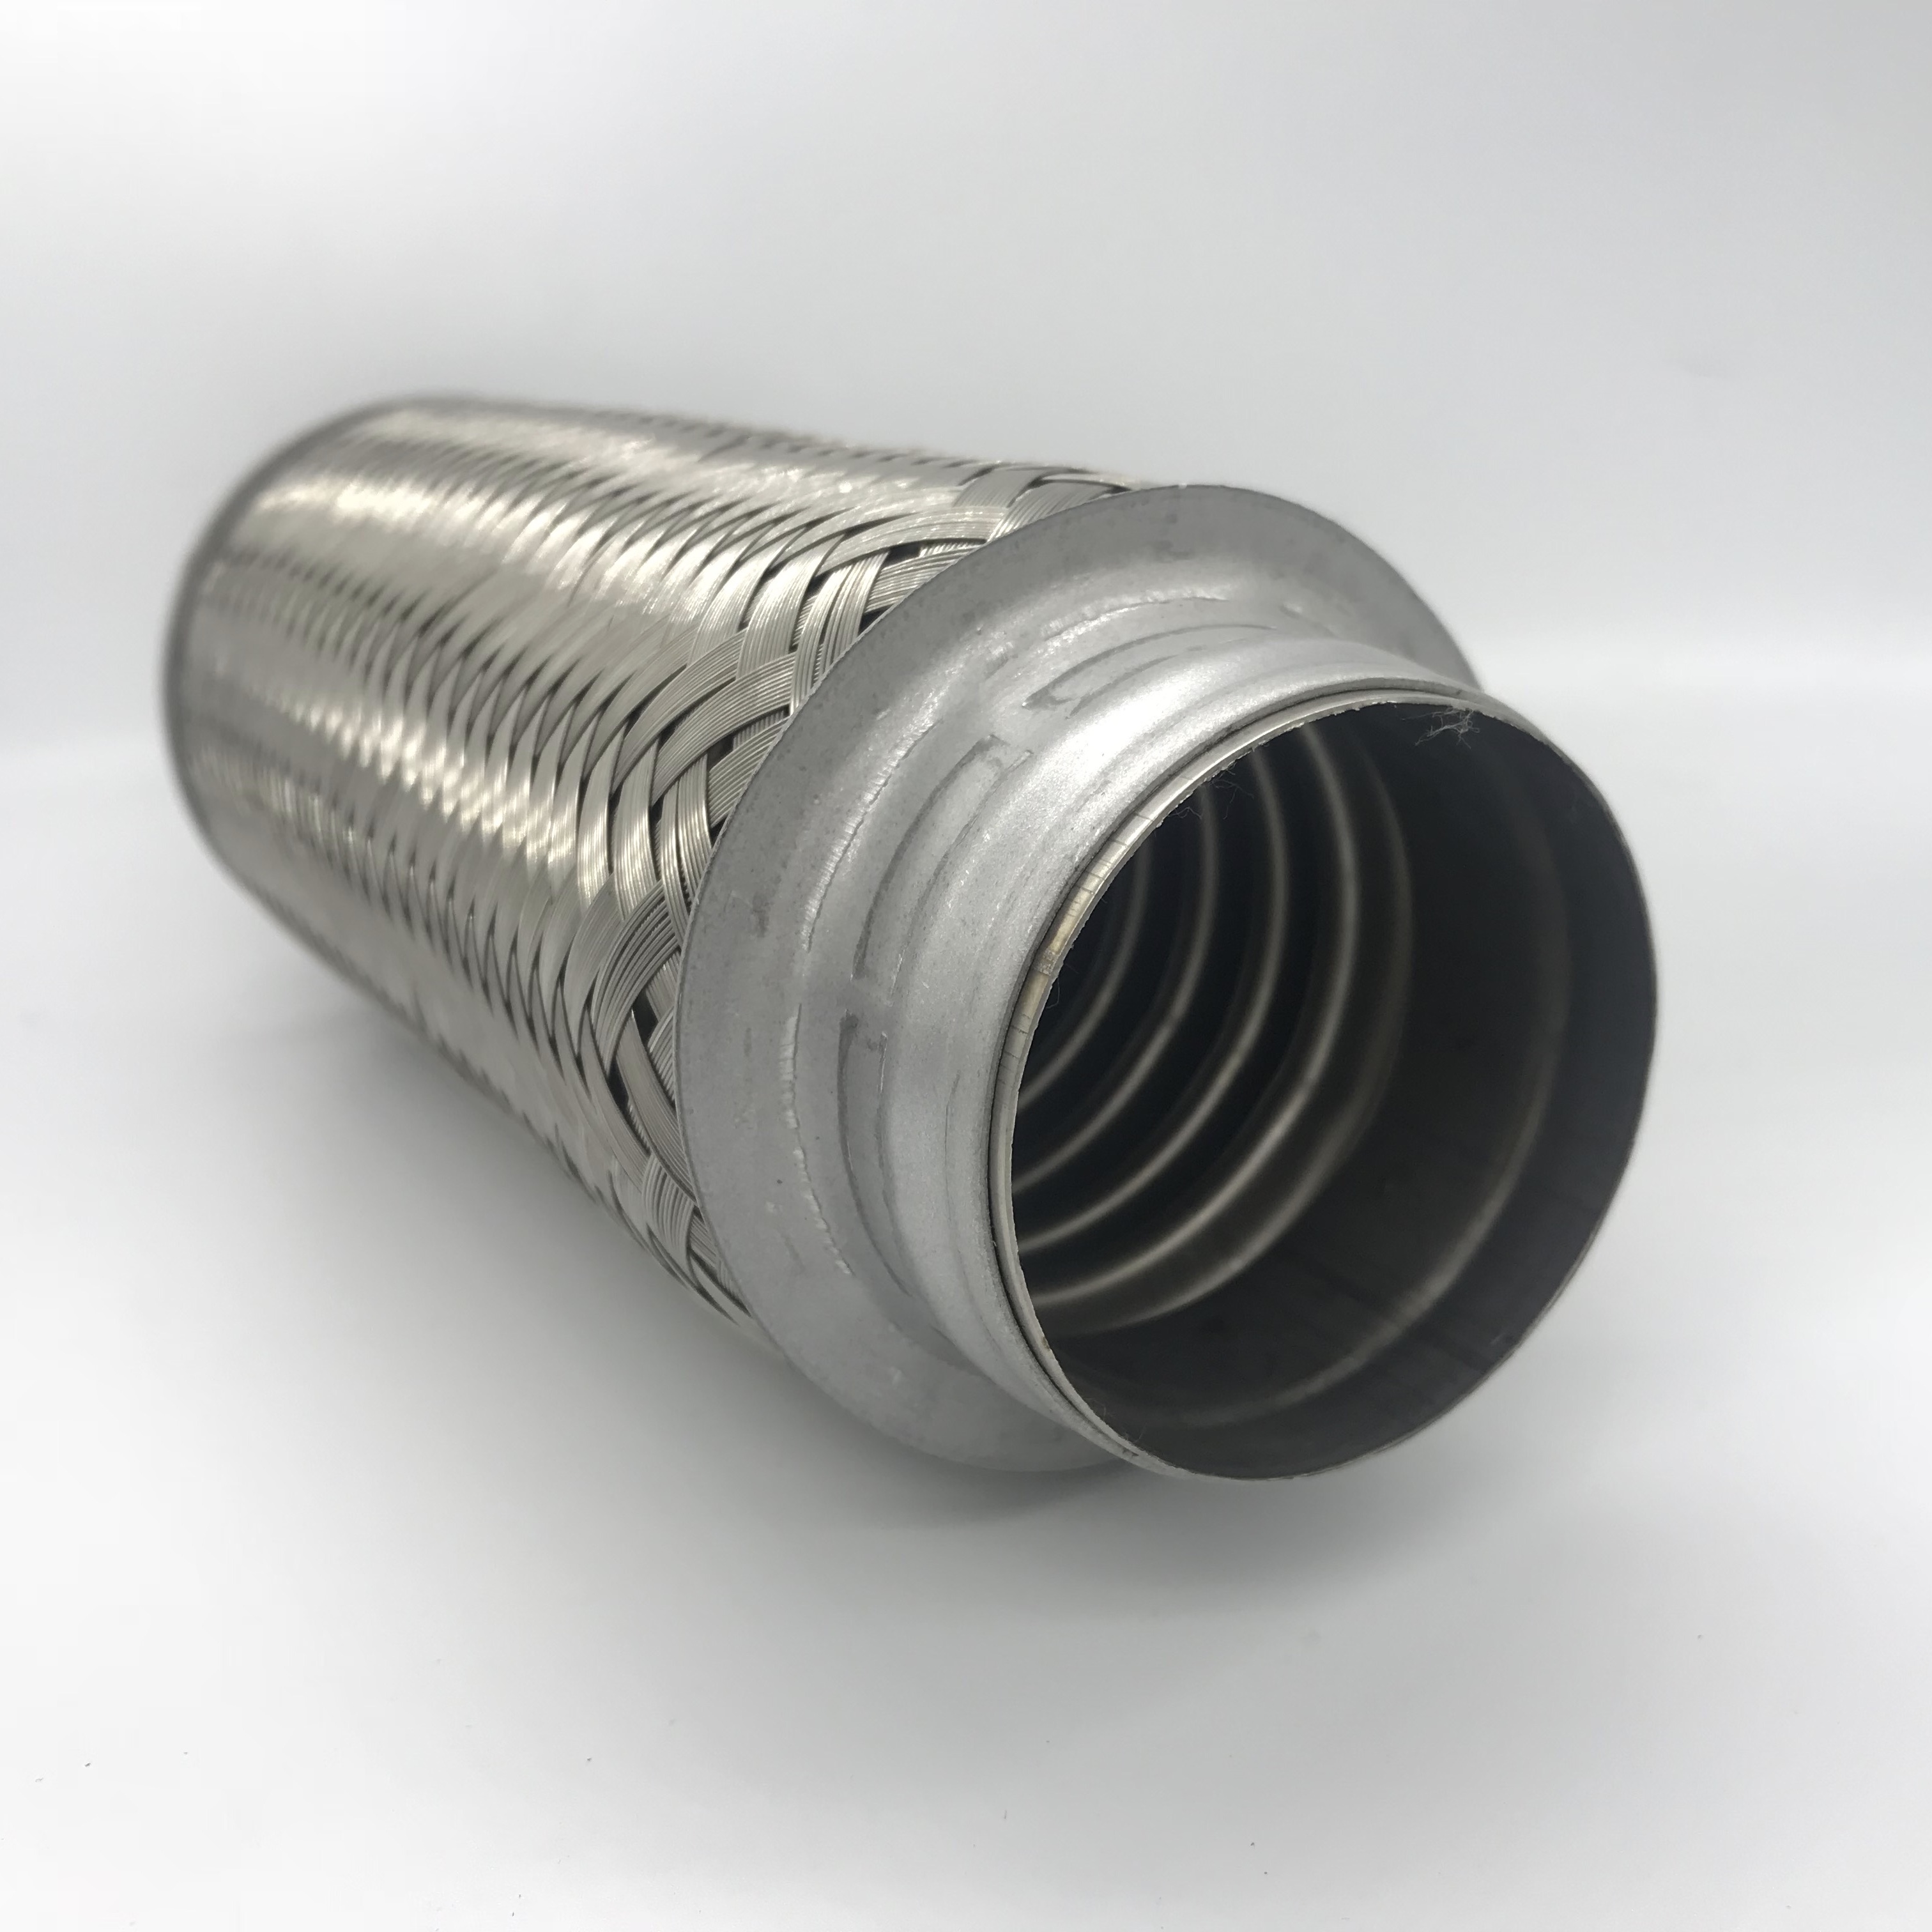 Stainless steel automotive 1.5 inch exhaust flexible tube from China